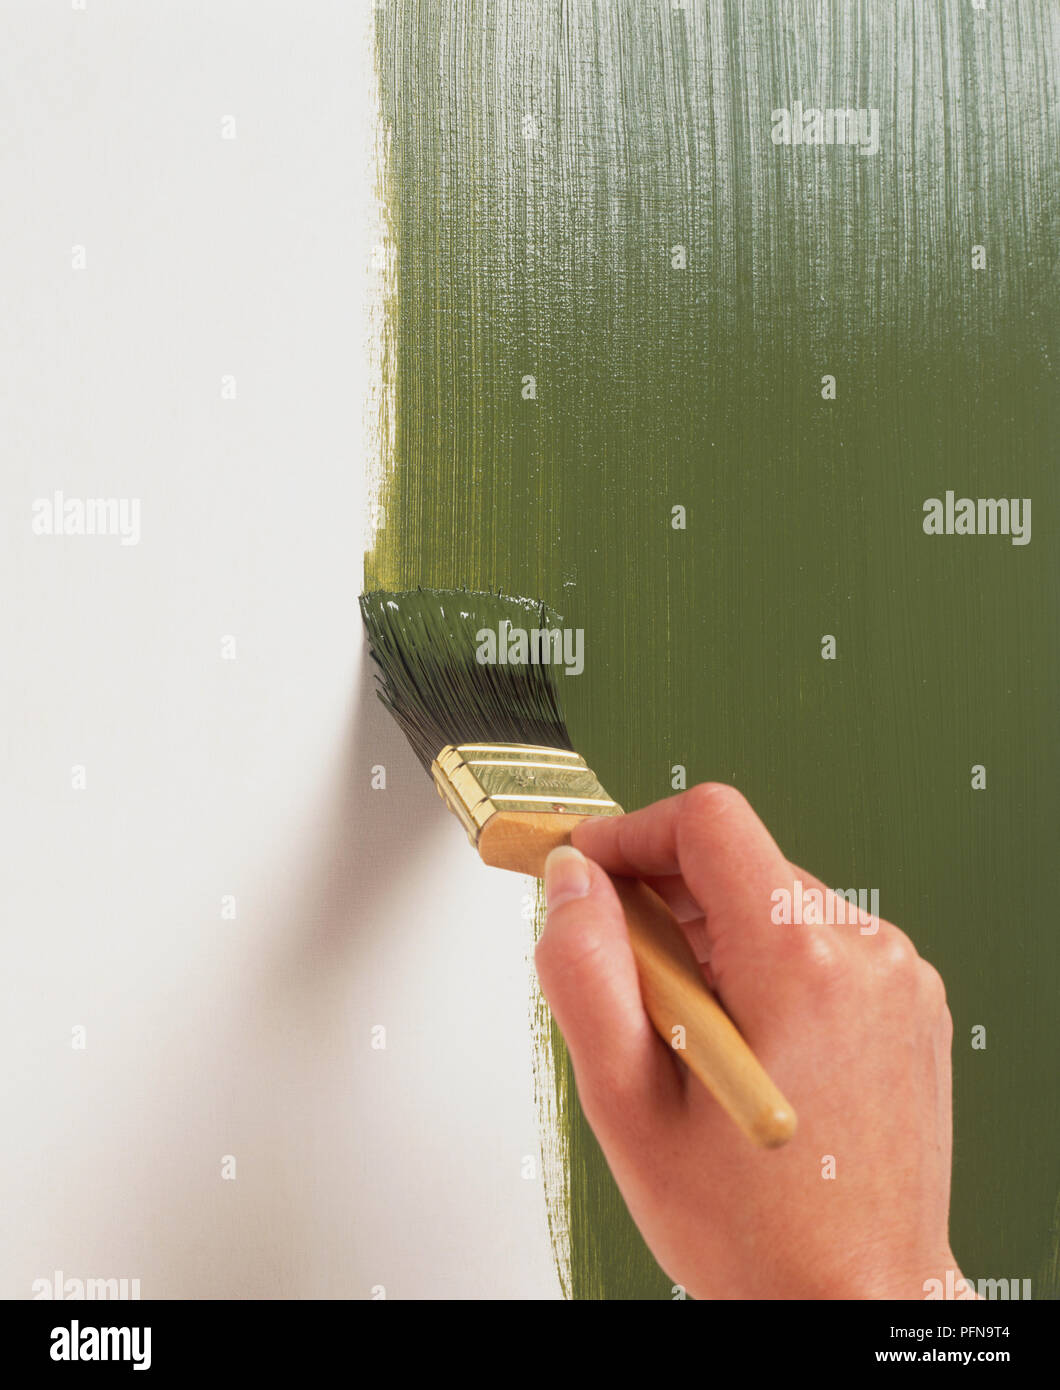 Using brush to apply even coat of olive green paint, close up. Stock Photo